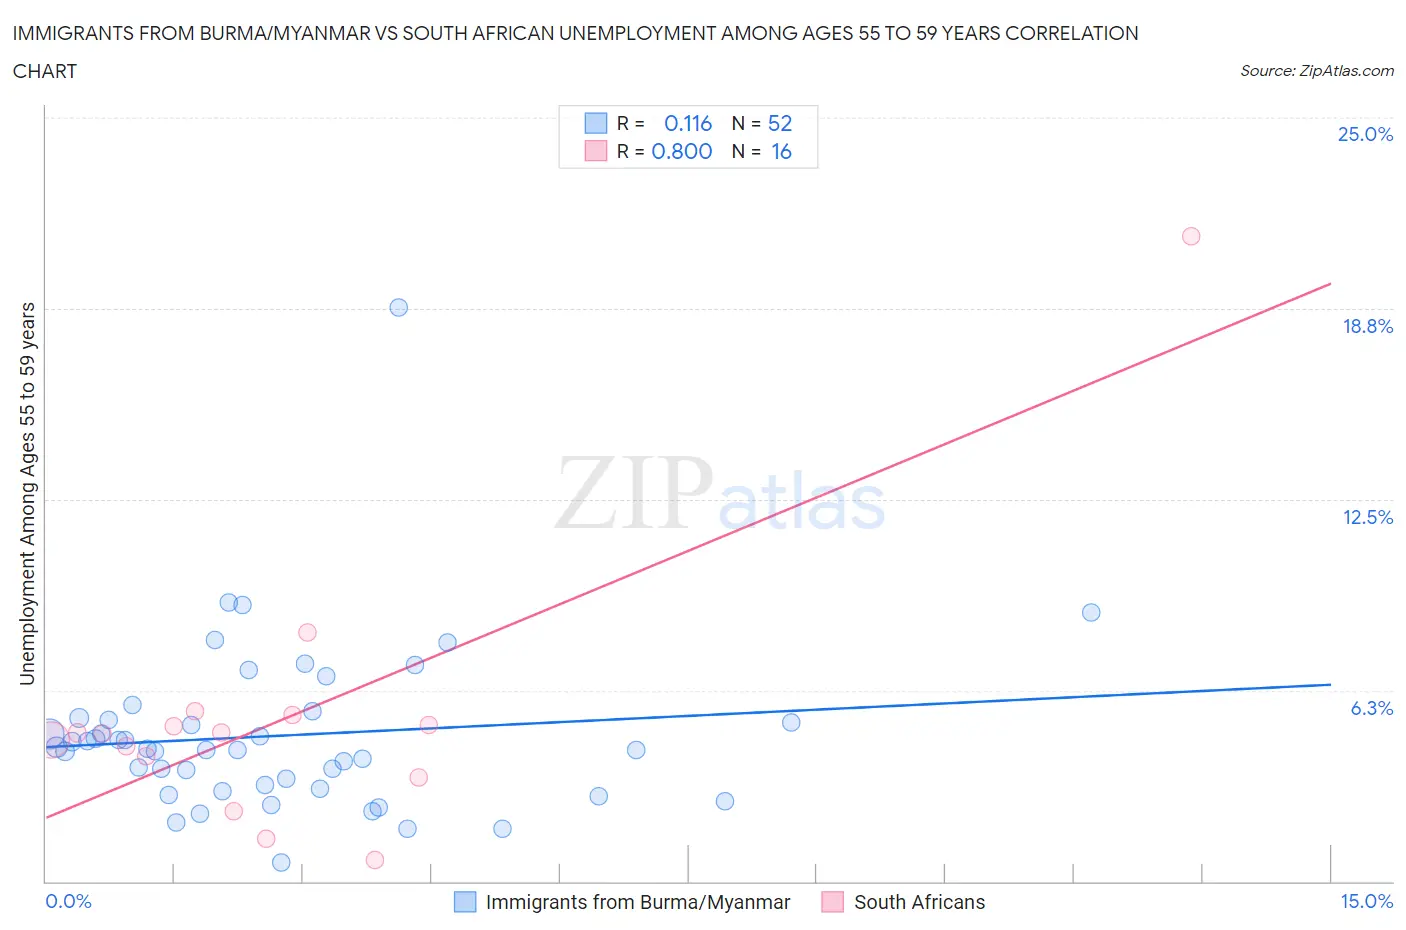 Immigrants from Burma/Myanmar vs South African Unemployment Among Ages 55 to 59 years